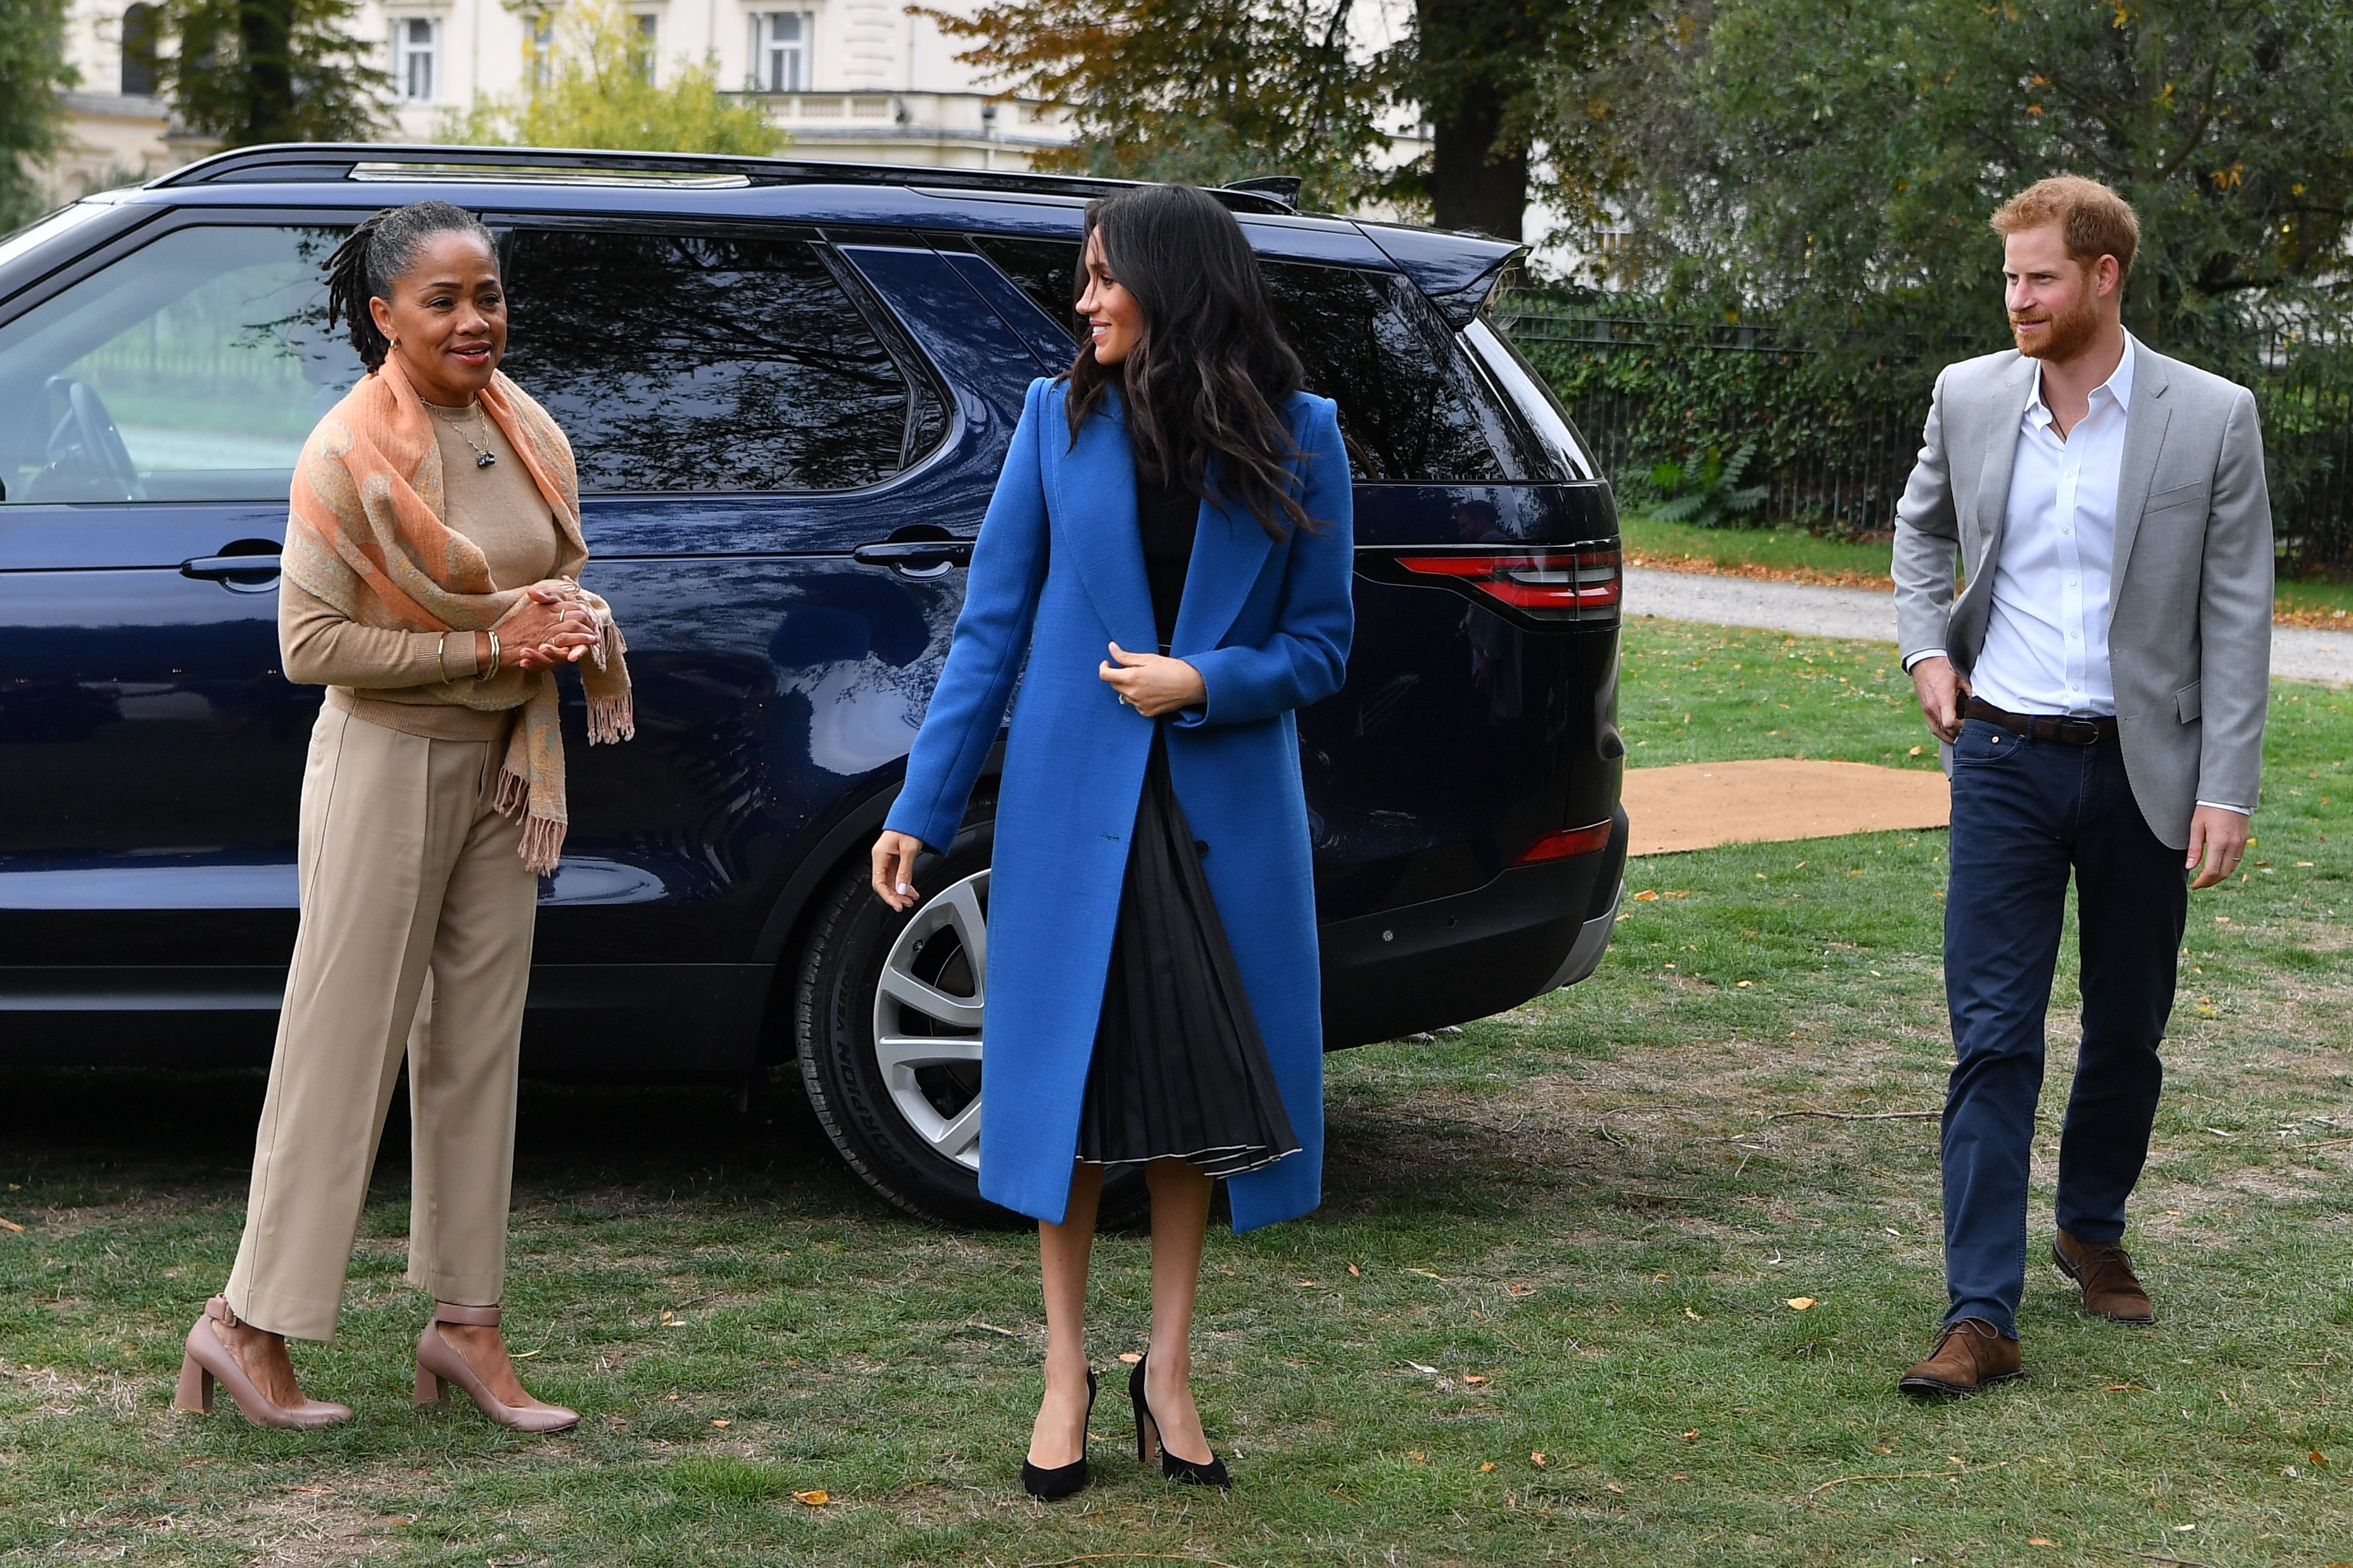 Doria Ragland, Meghan Markle and Prince Harry arrive at cookbook event in September 2018 | Photo: Getty Images